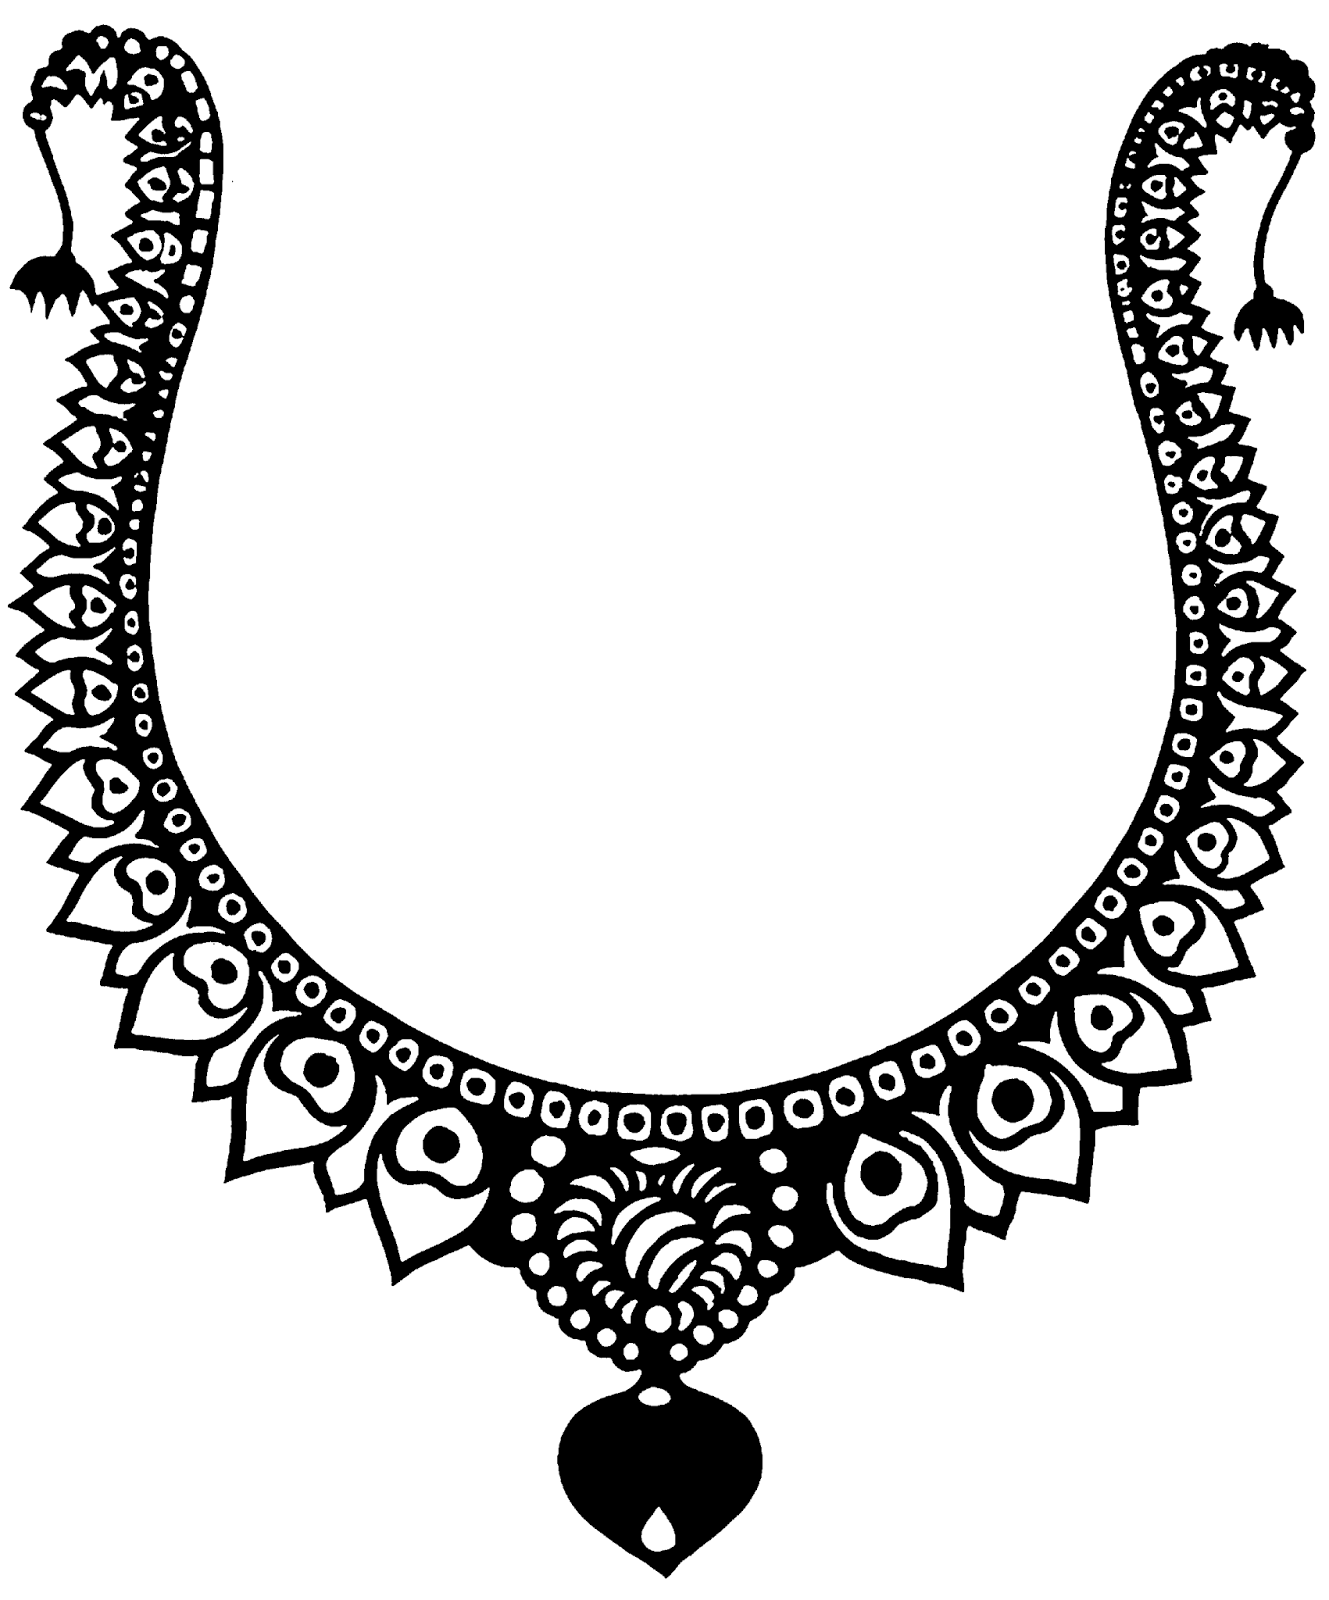 Free Jewelry Cliparts White, Download Free Clip Art, Free Clip Art on ...